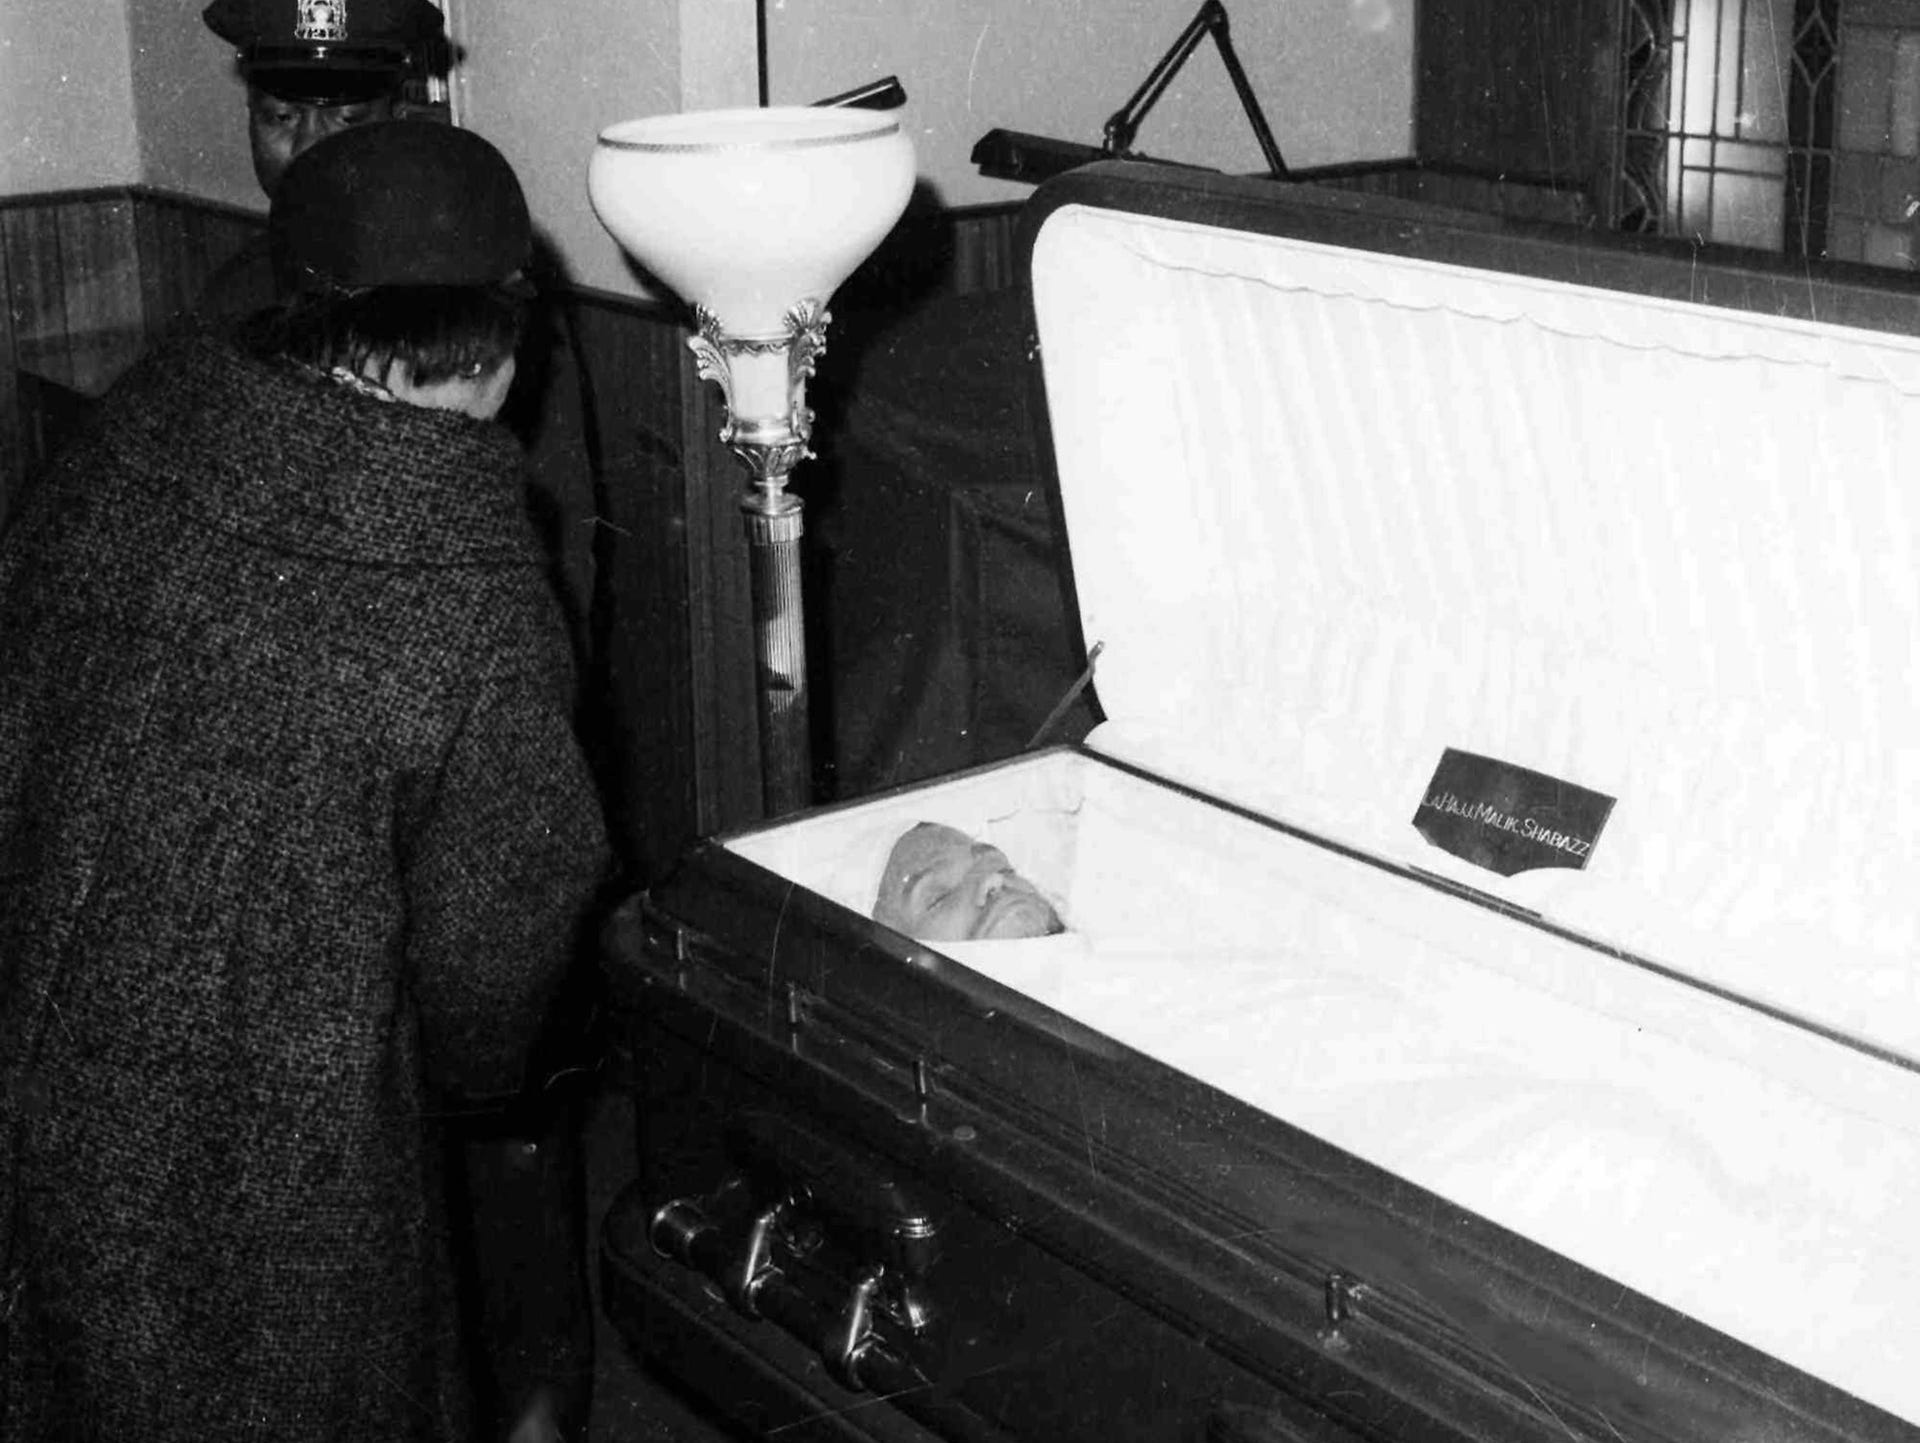 LE--Malcolm X's widow, Betty, takes a last look at